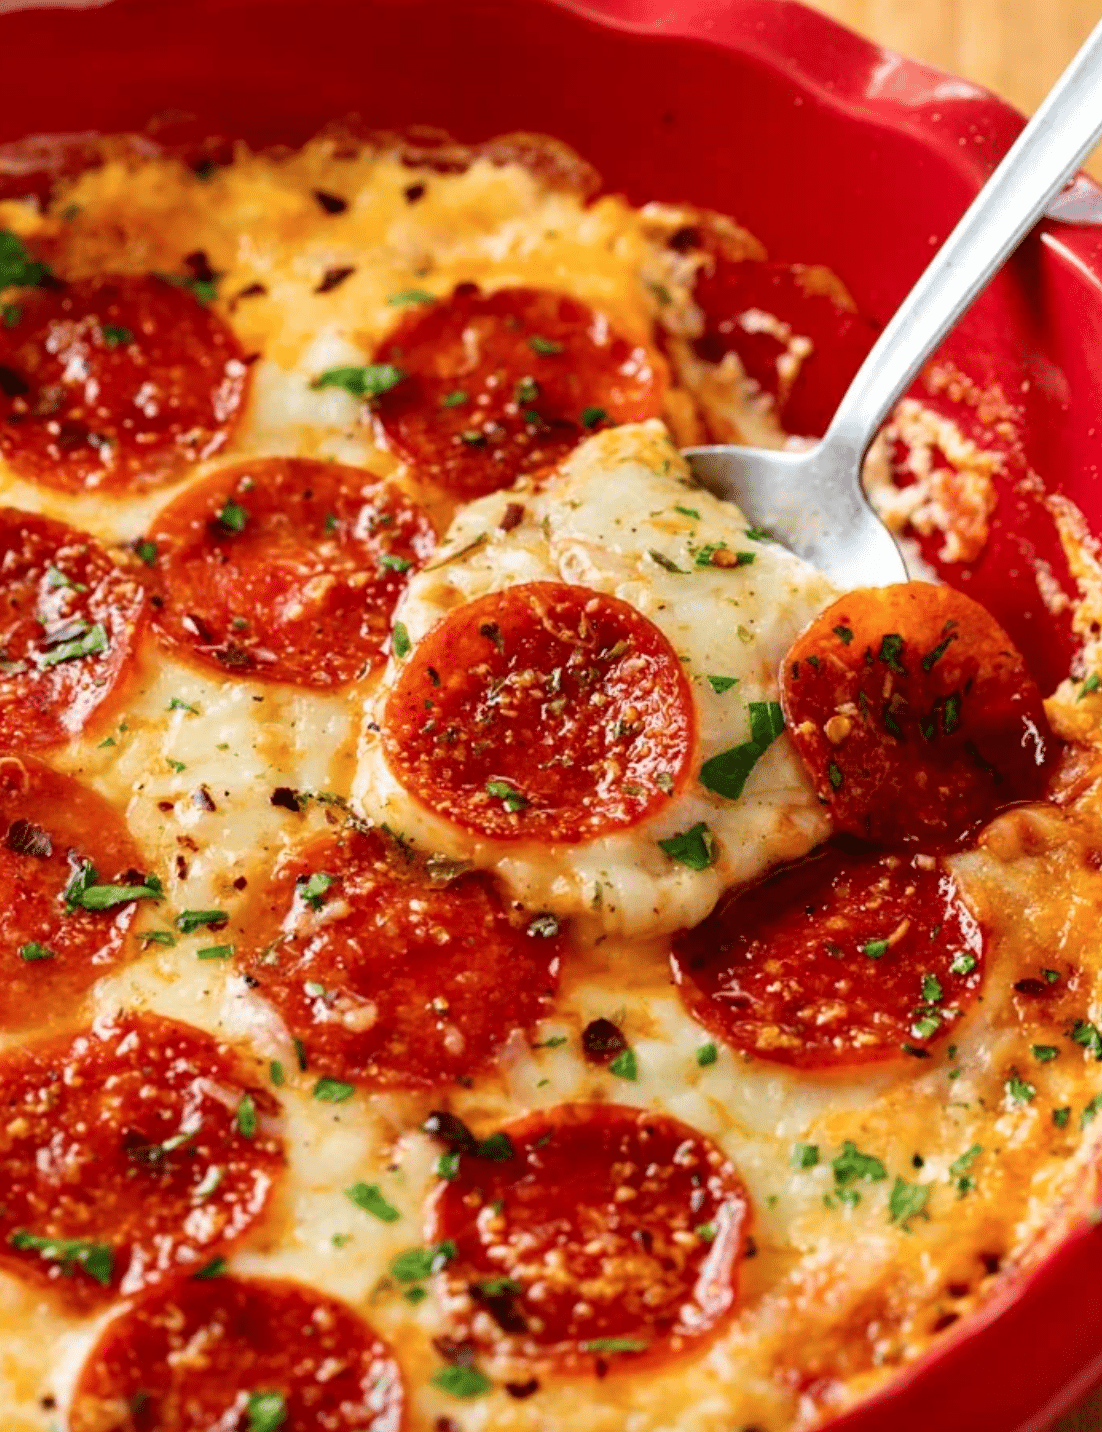 If you’re looking for an easy dip recipe that’ll keep people talking for days…you just found it. You really can’t beat this pizza dip recipe.

